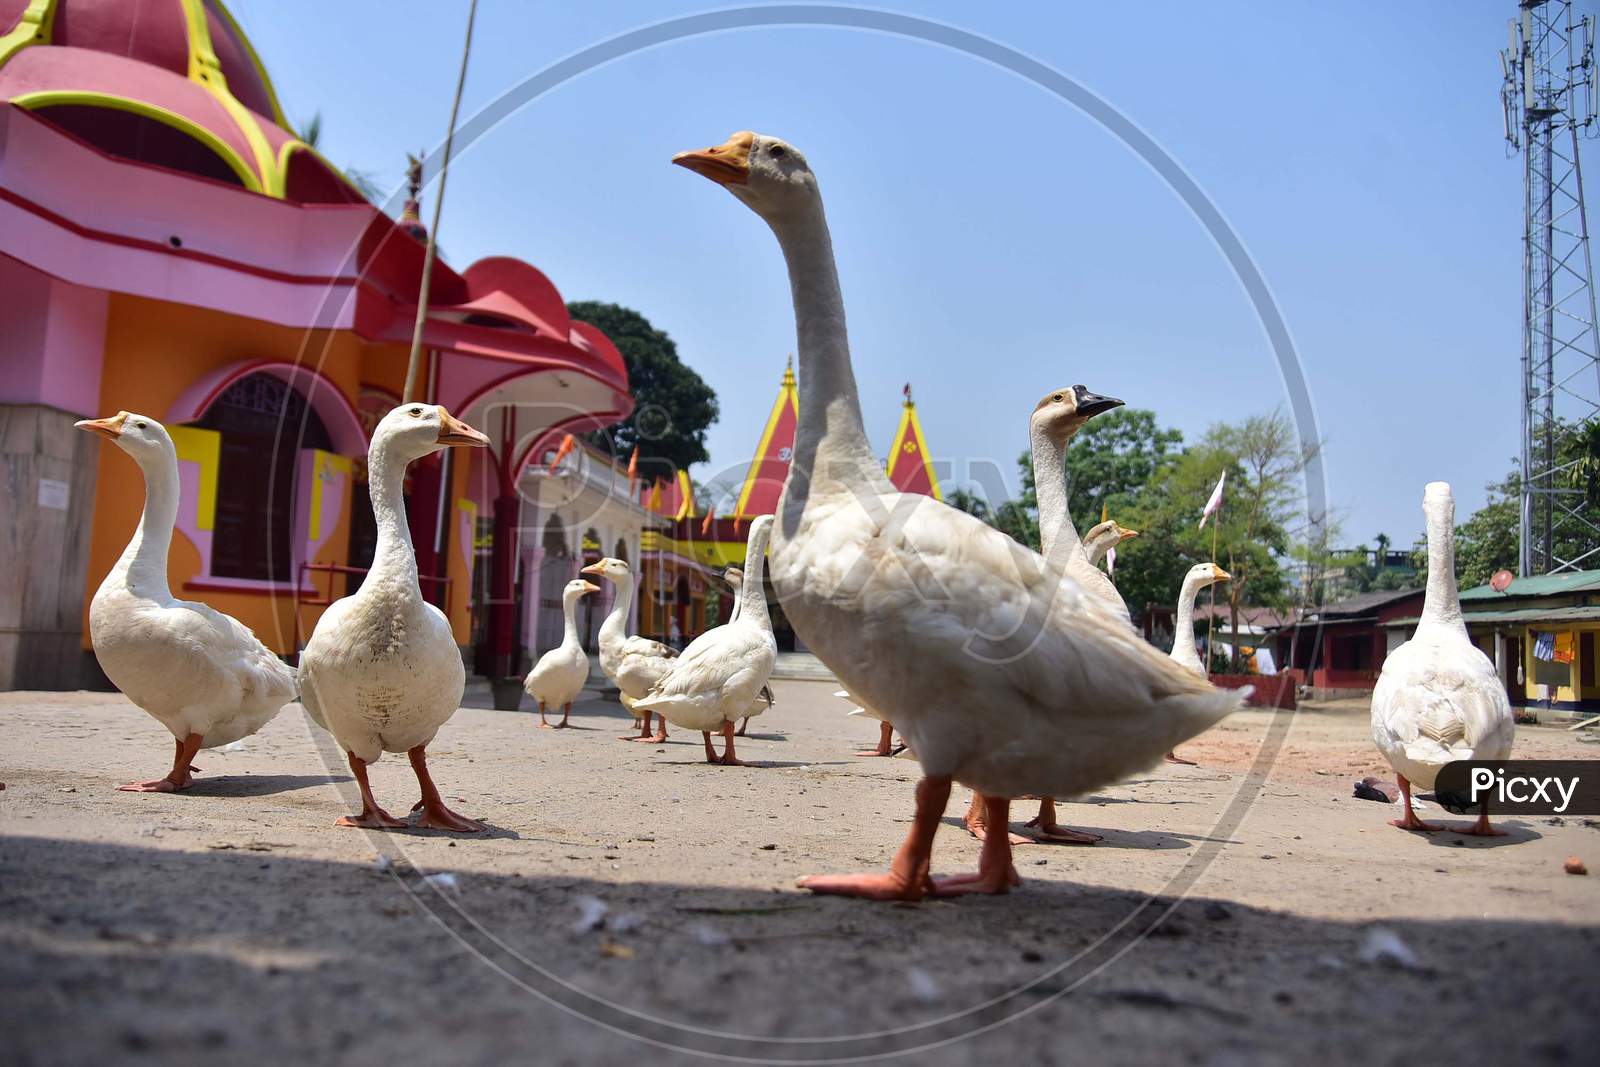 A Flock Of Geese Seen At A Temple During Nationwide Lockdown, As A Preventive Measure Against The Covid-19 Coronavirus, In Nagaon District Of Assam On April 03,2020